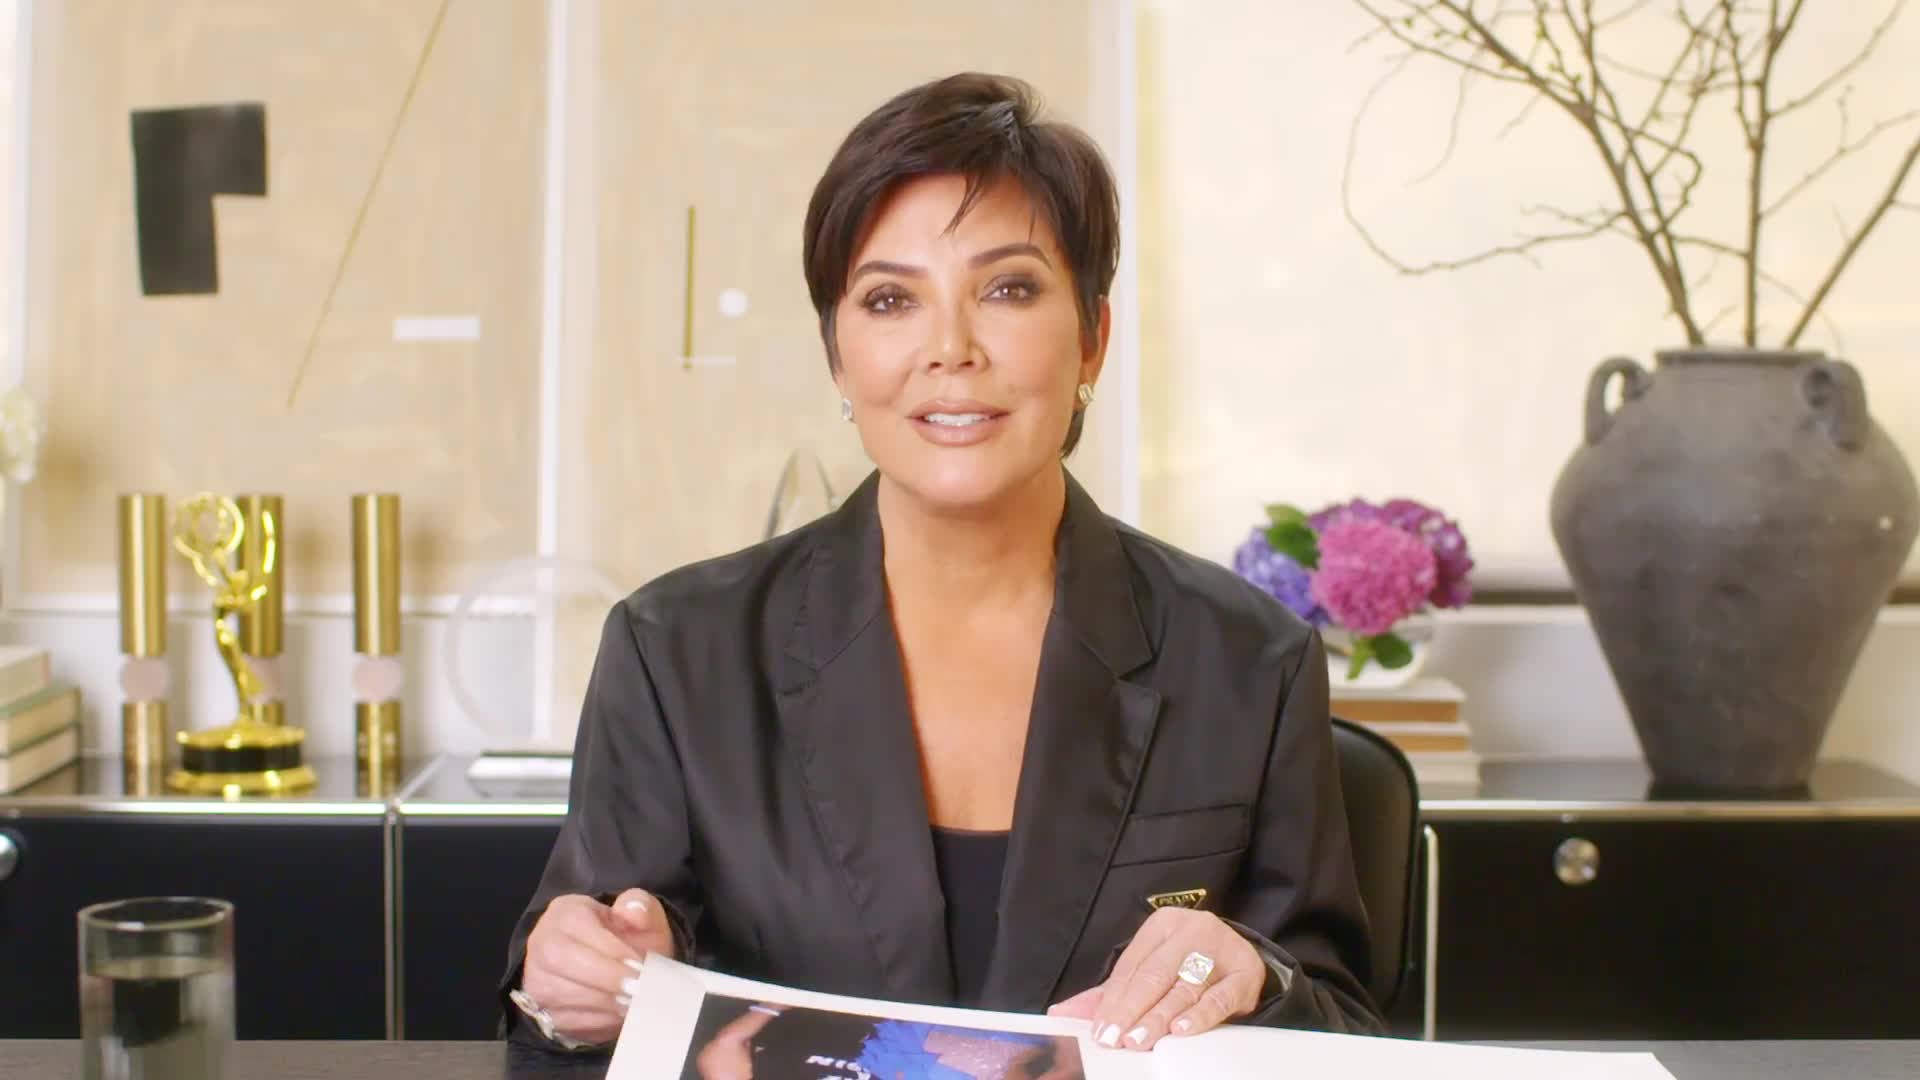 Kris Jenner Leaving This Designer Item for North West In Her Will